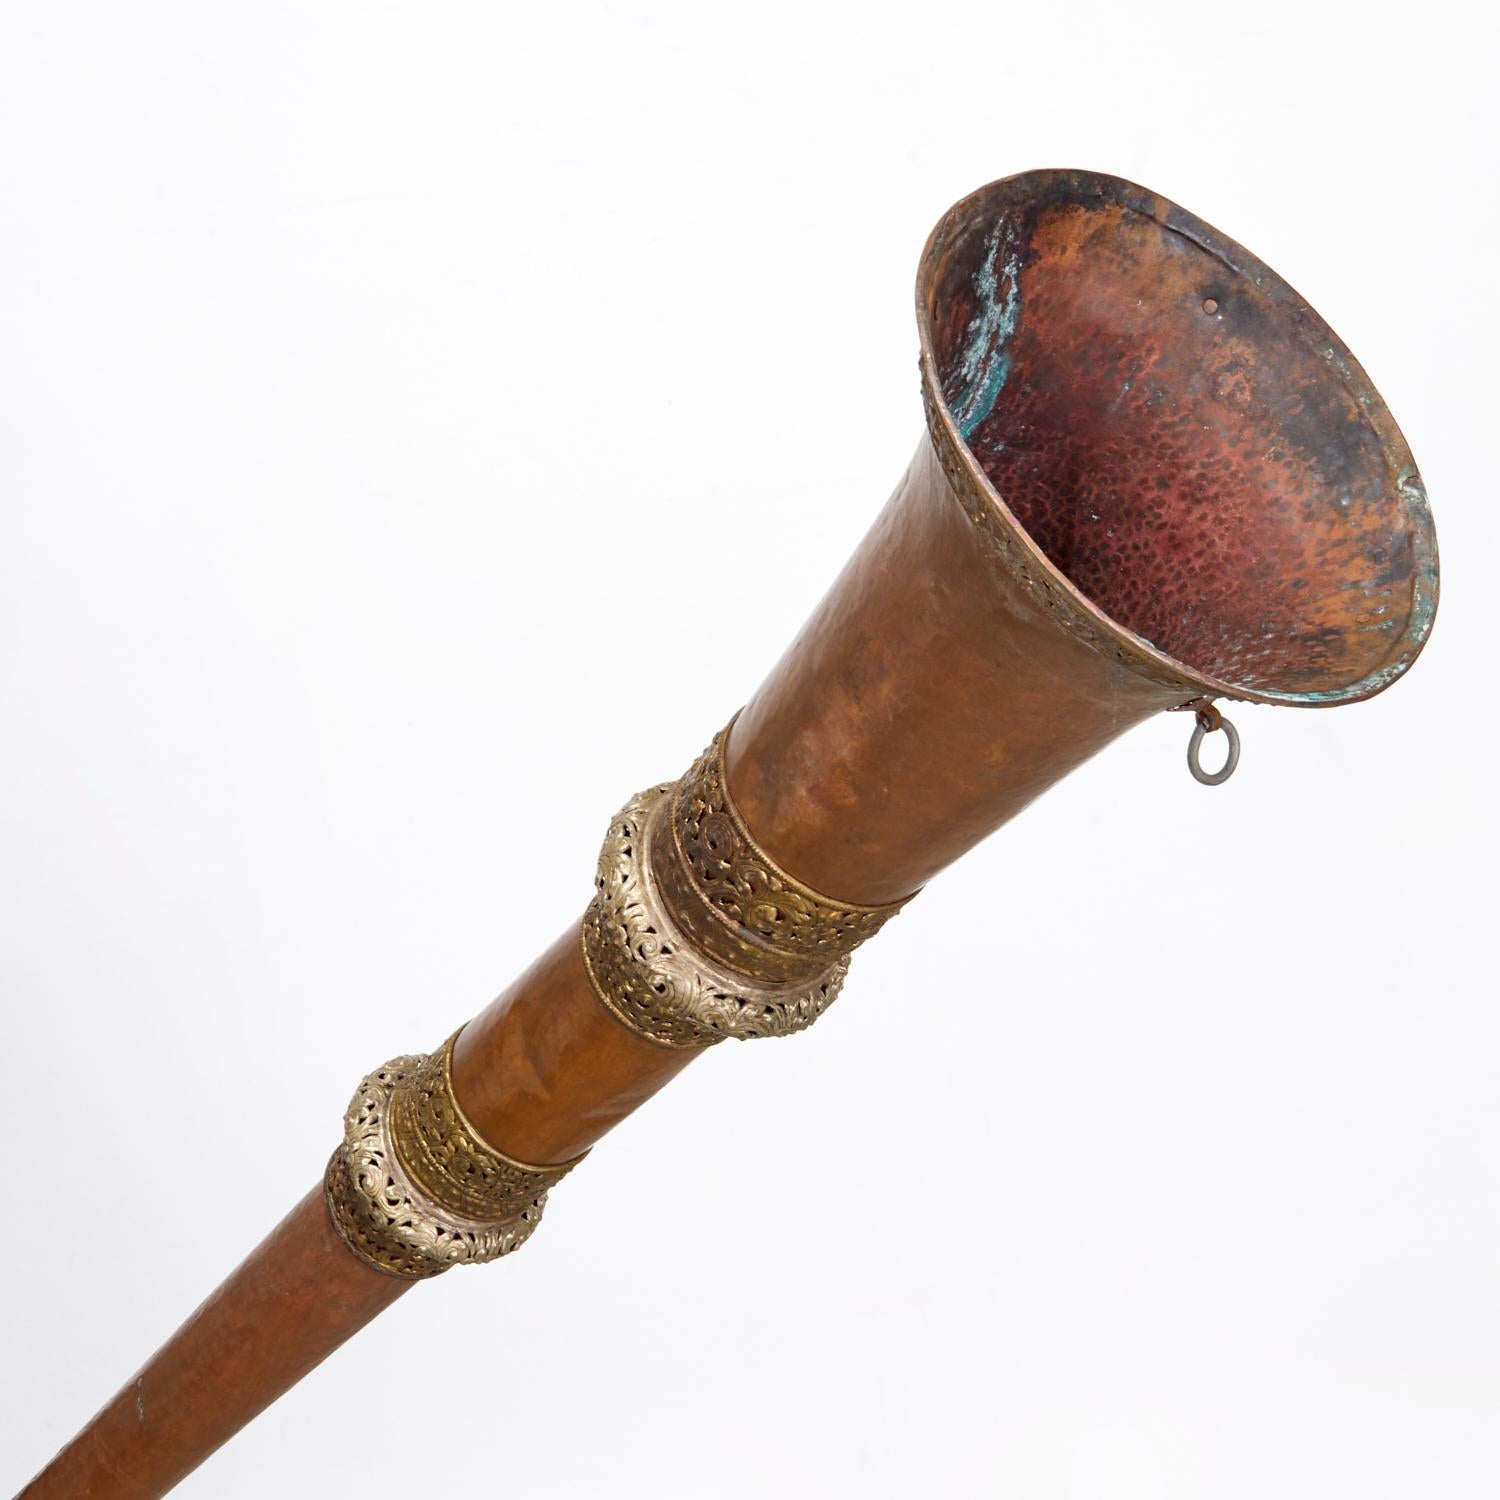 Late 19th/Early 20th c., Tibet. A hand hammered copper moniastic instrument with pierced silvered brass cuffs and telescoping length.

This item came from Barbara J. Walters NYC apartment and was one of the exceptional, diverse, and fascinating